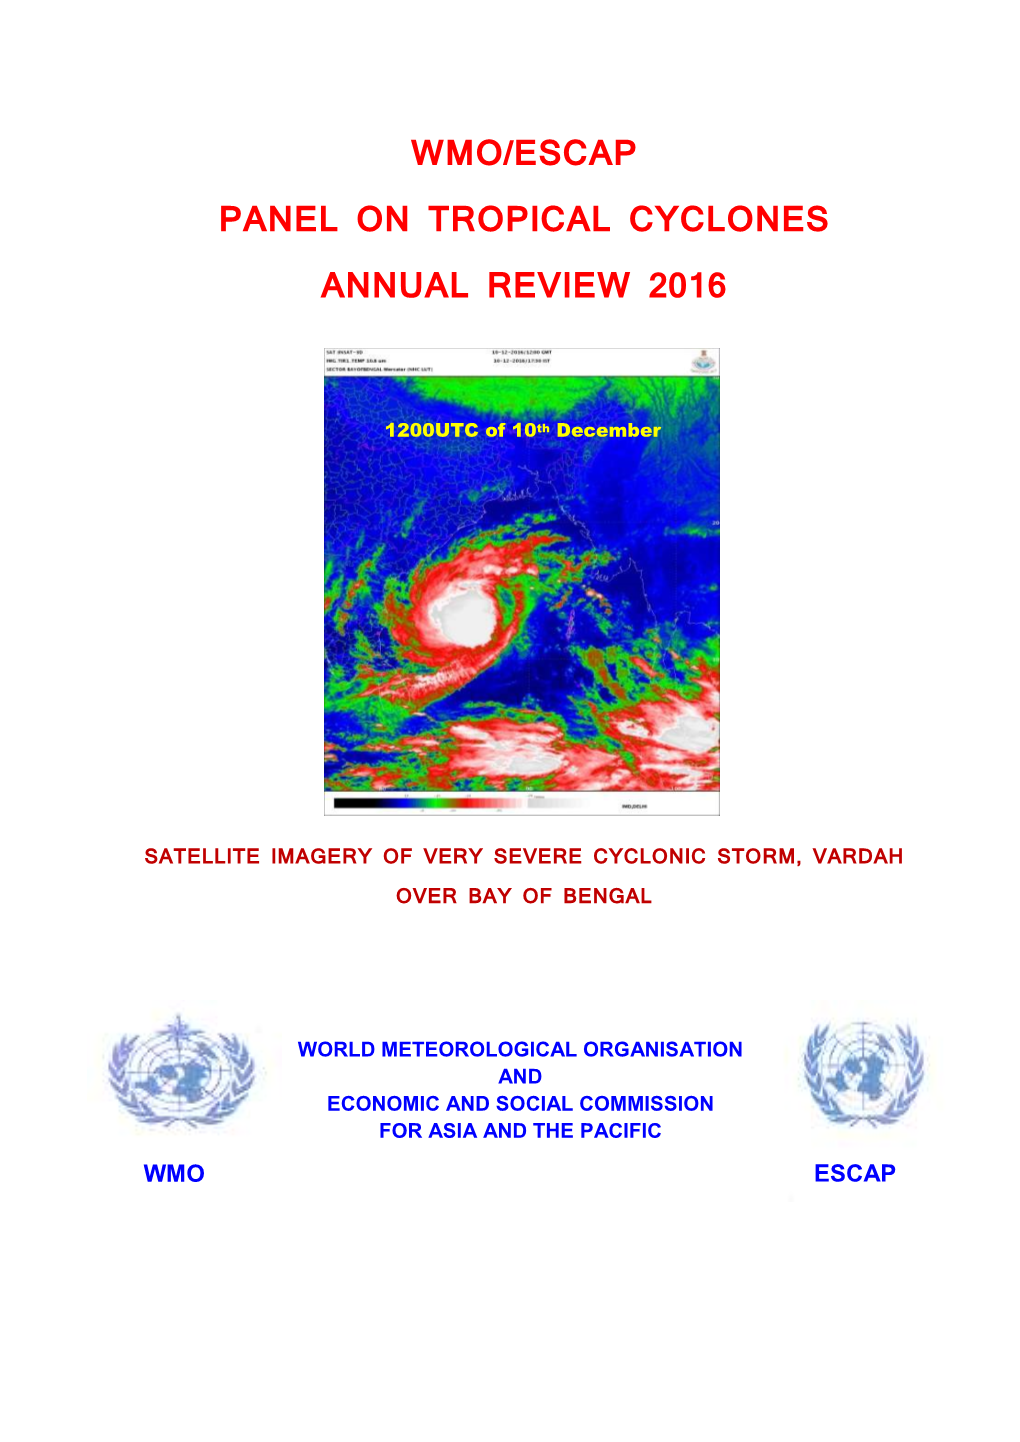 Wmo/Escap Panel on Tropical Cyclones Annual Review 2016